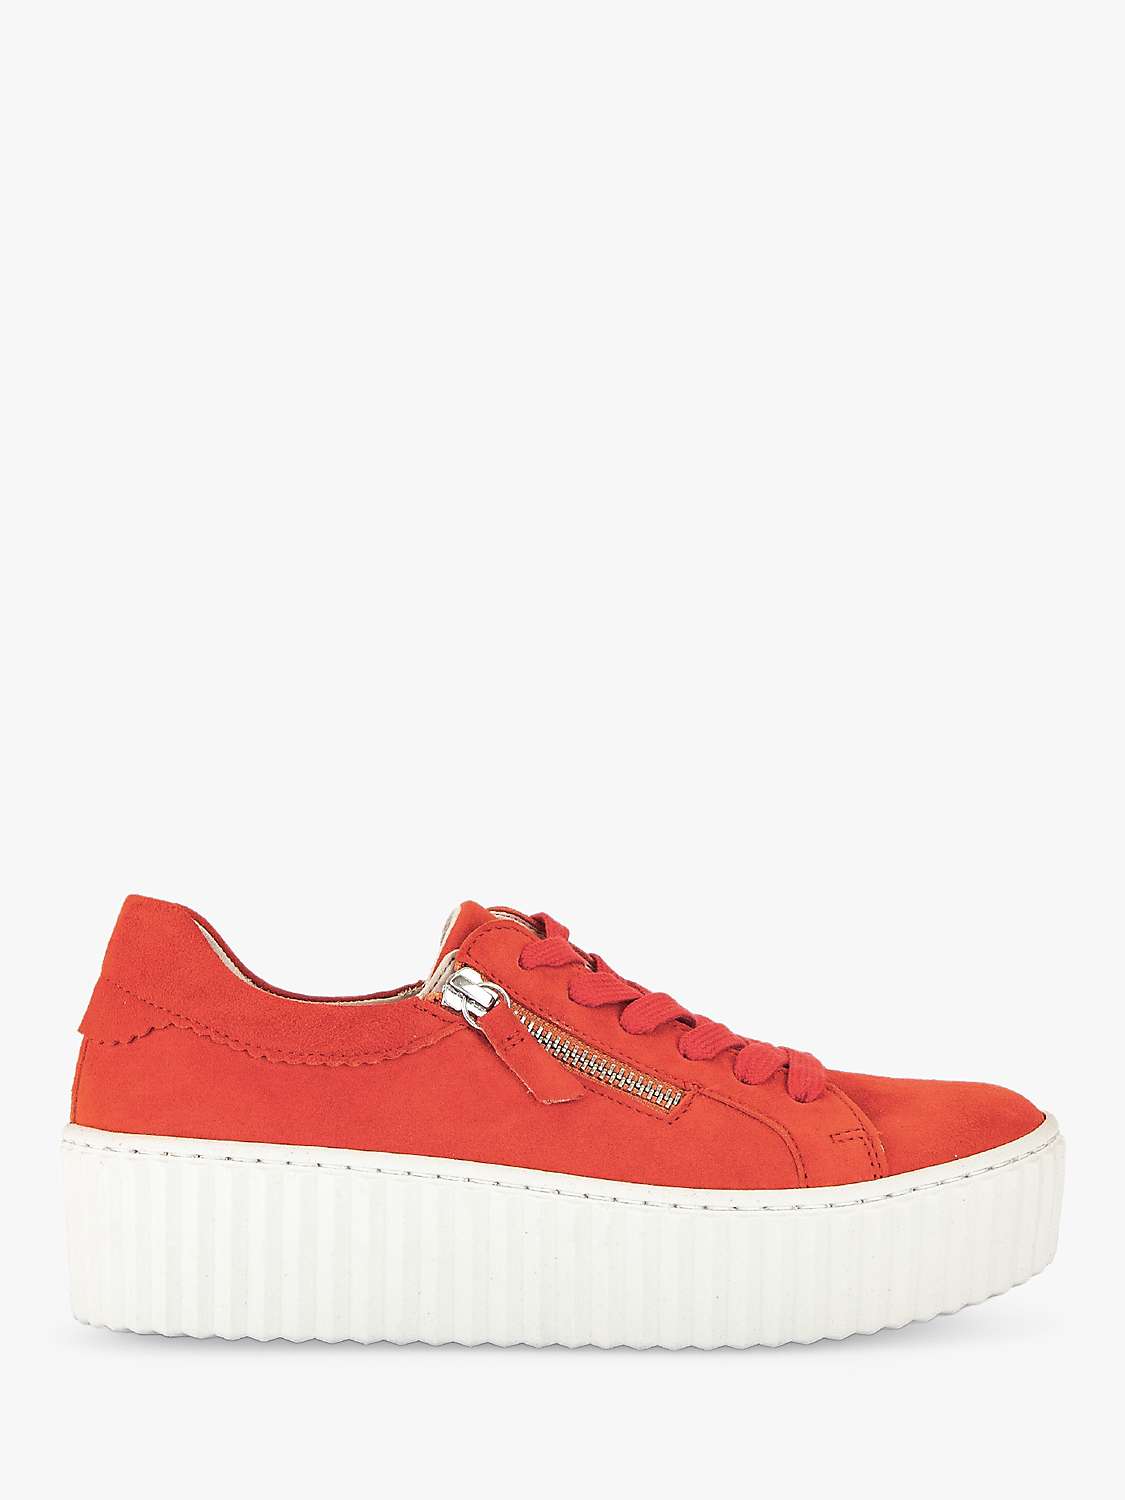 Buy Gabor Dolly Suede Zip Detail Trainers, Orange/White Online at johnlewis.com